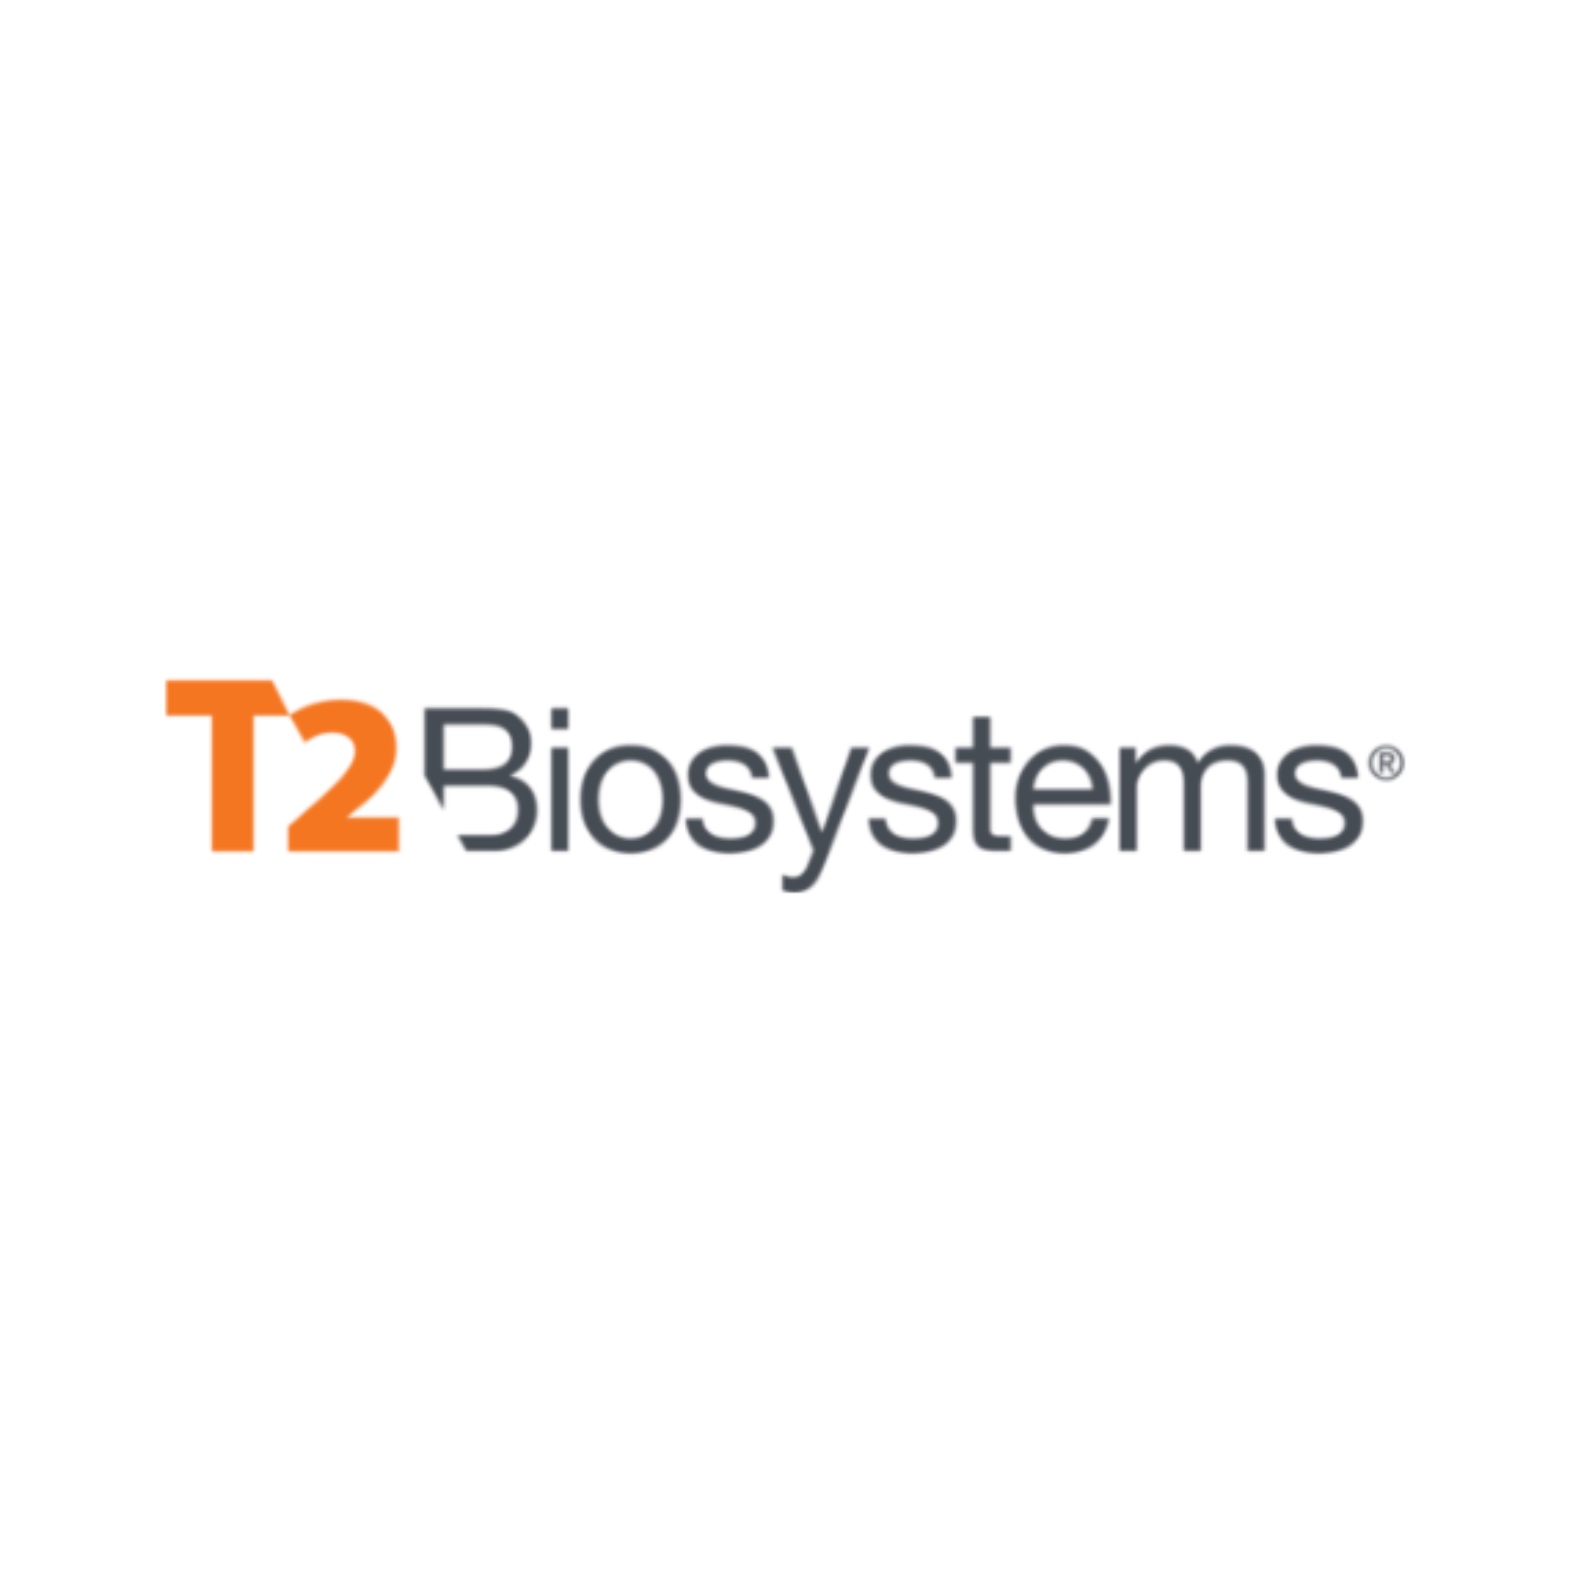 images/AFMS/Partners/T2%20Biosystems.jpg#joomlaImage://local-images/AFMS/Partners/T2 Biosystems.jpg?width=1570&height=1570